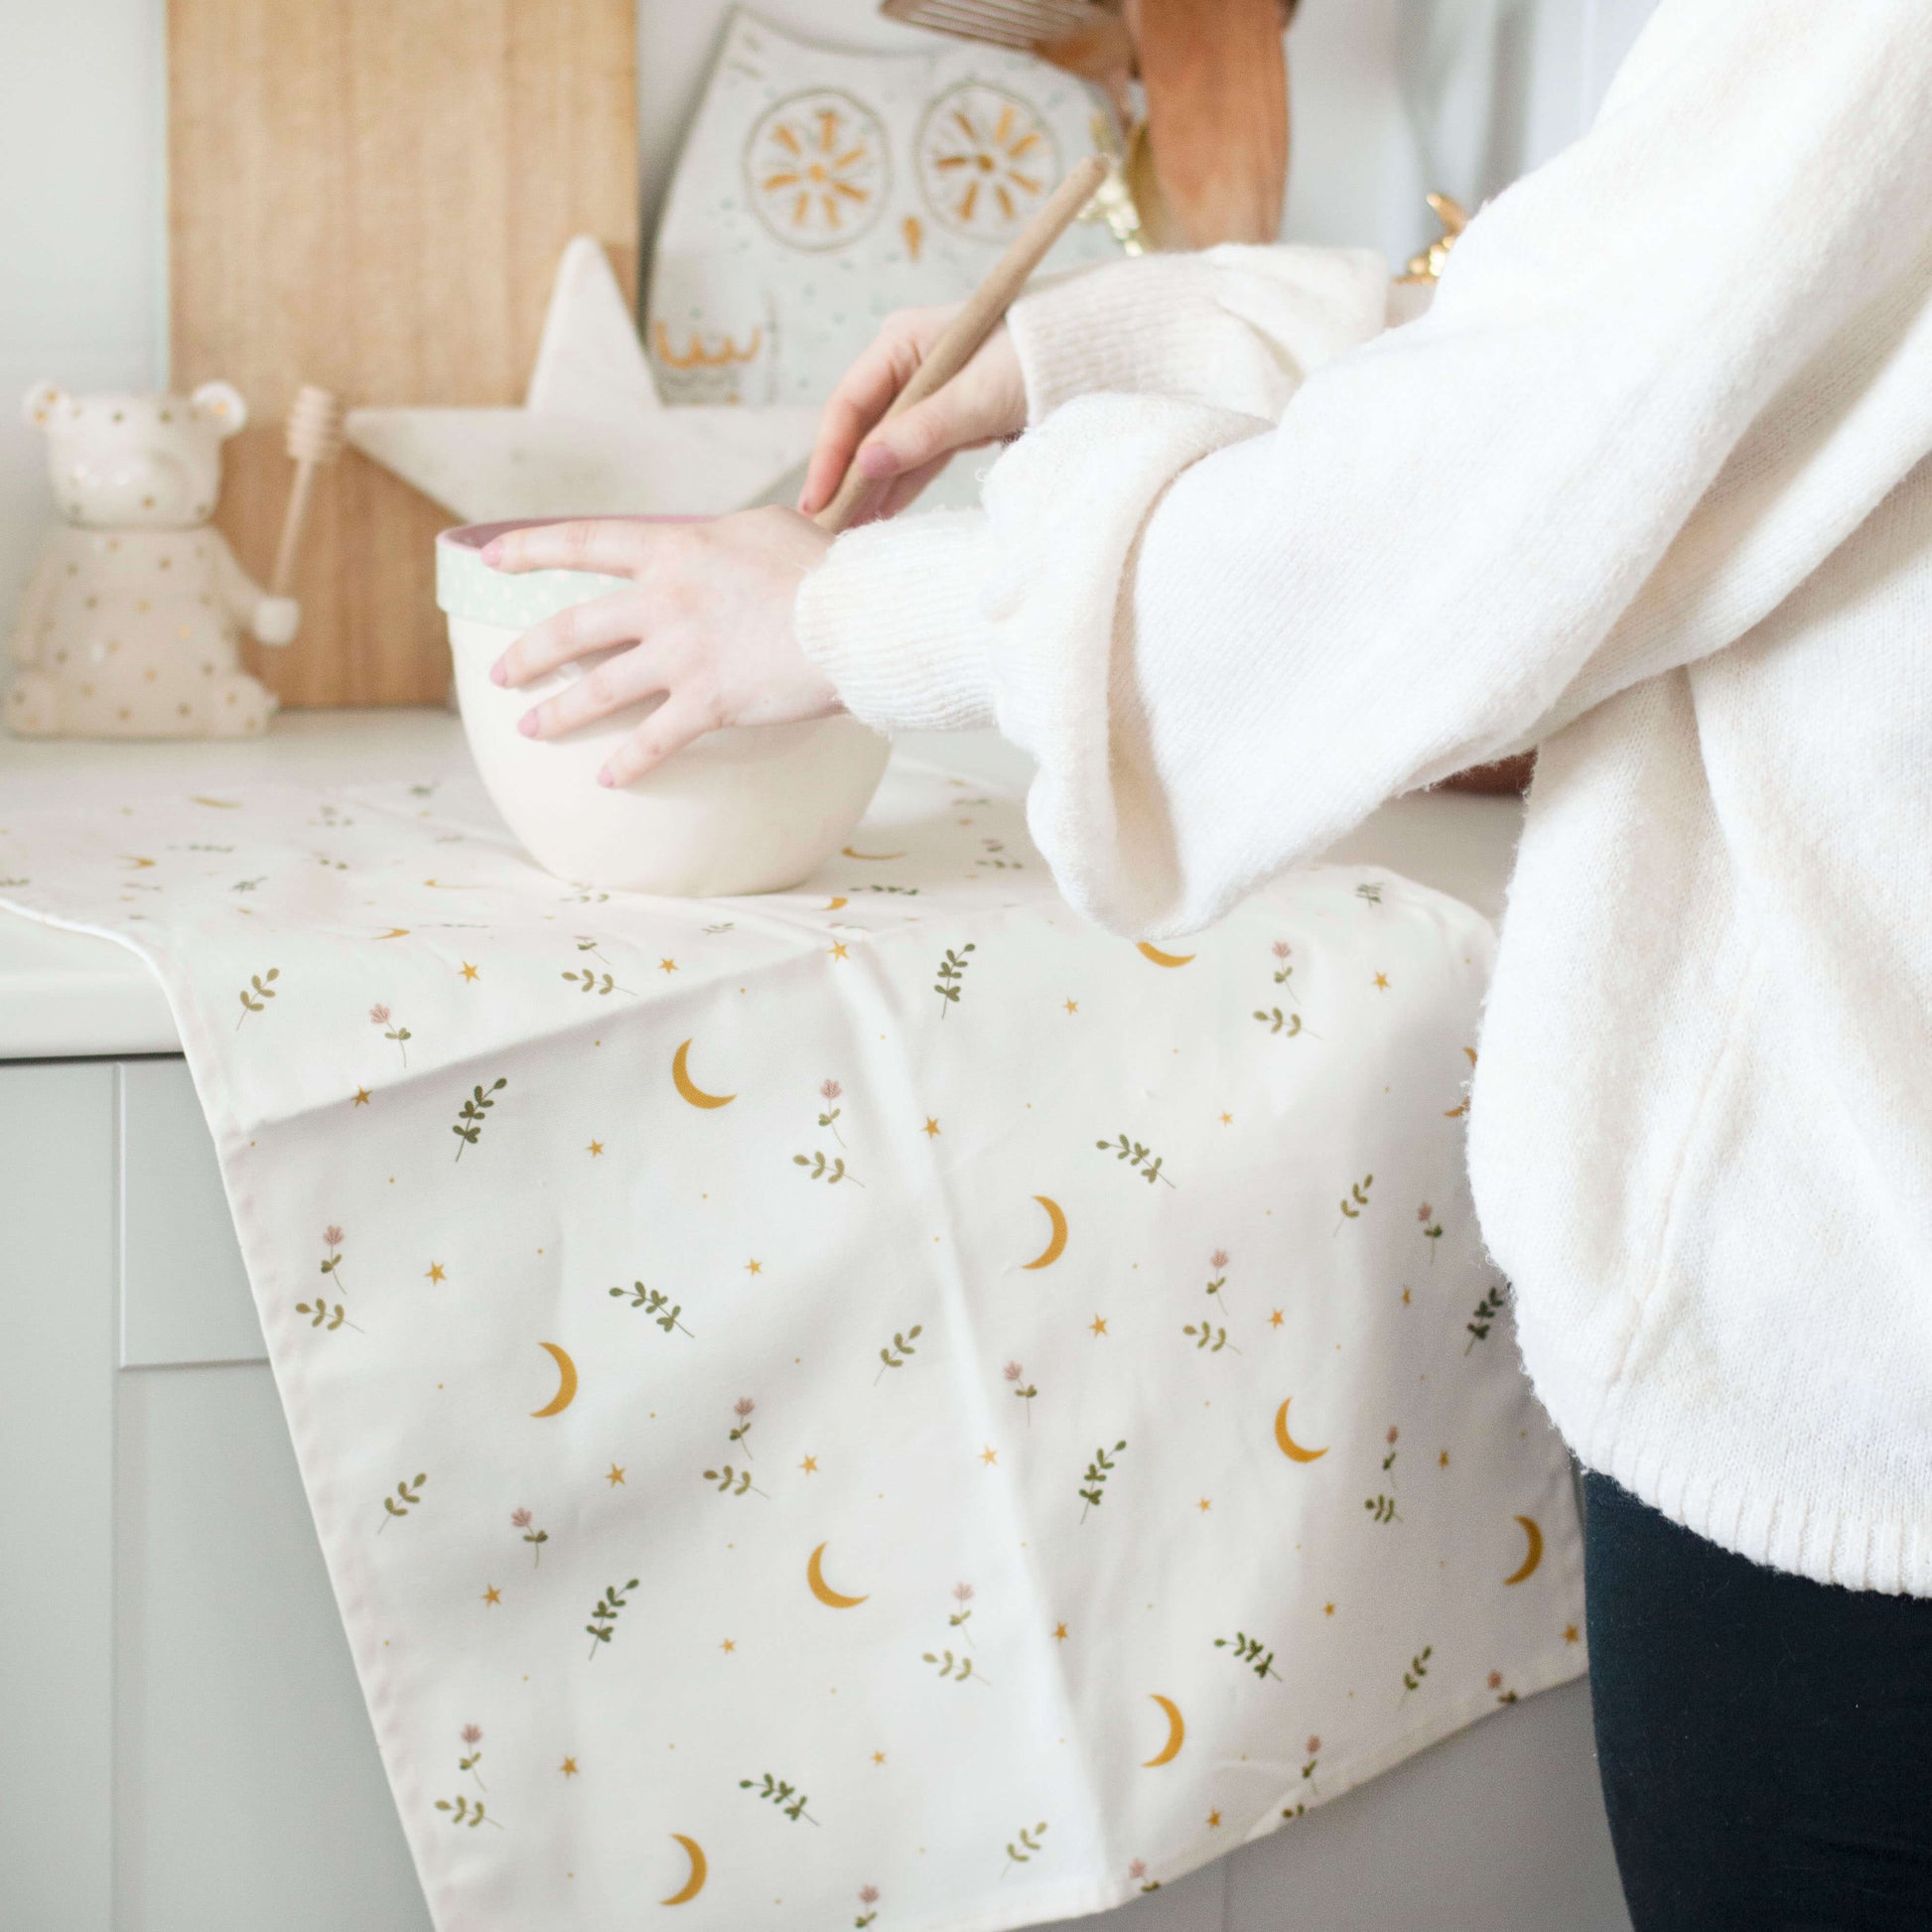 Moons and stars celestial pattern tea towel by Abbie Imagine